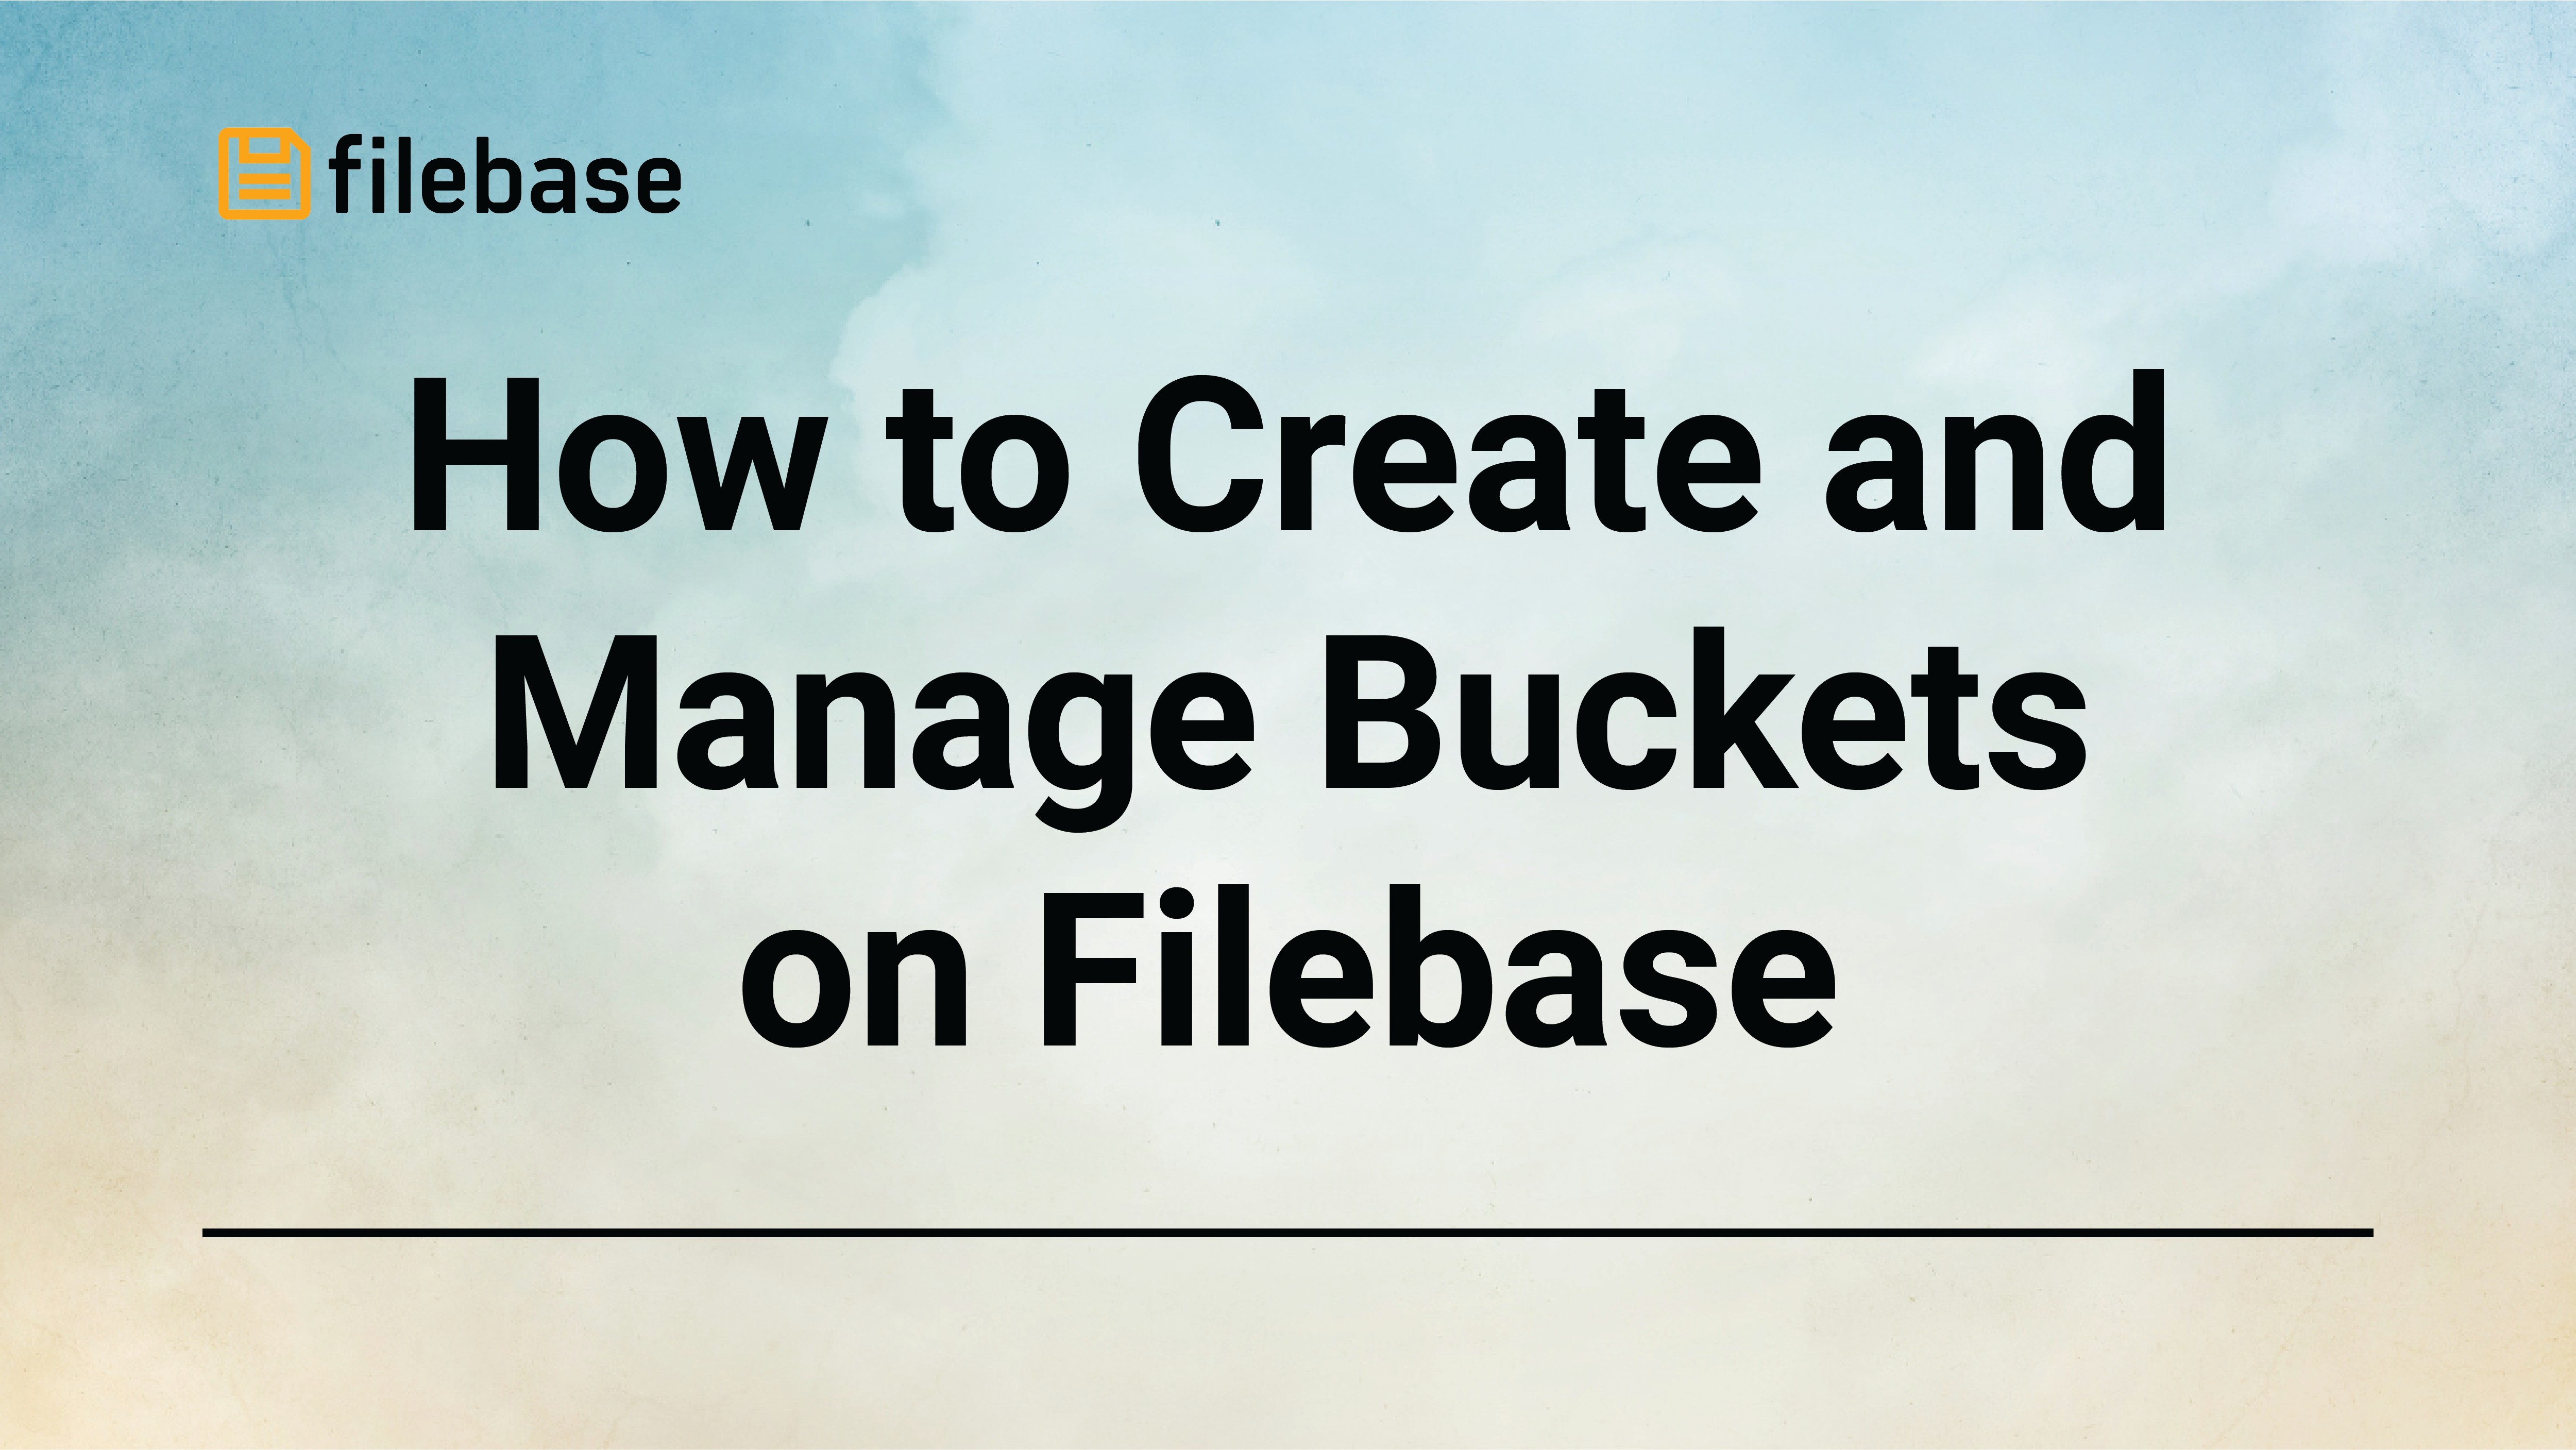 How to Create and Manage Buckets on Filebase